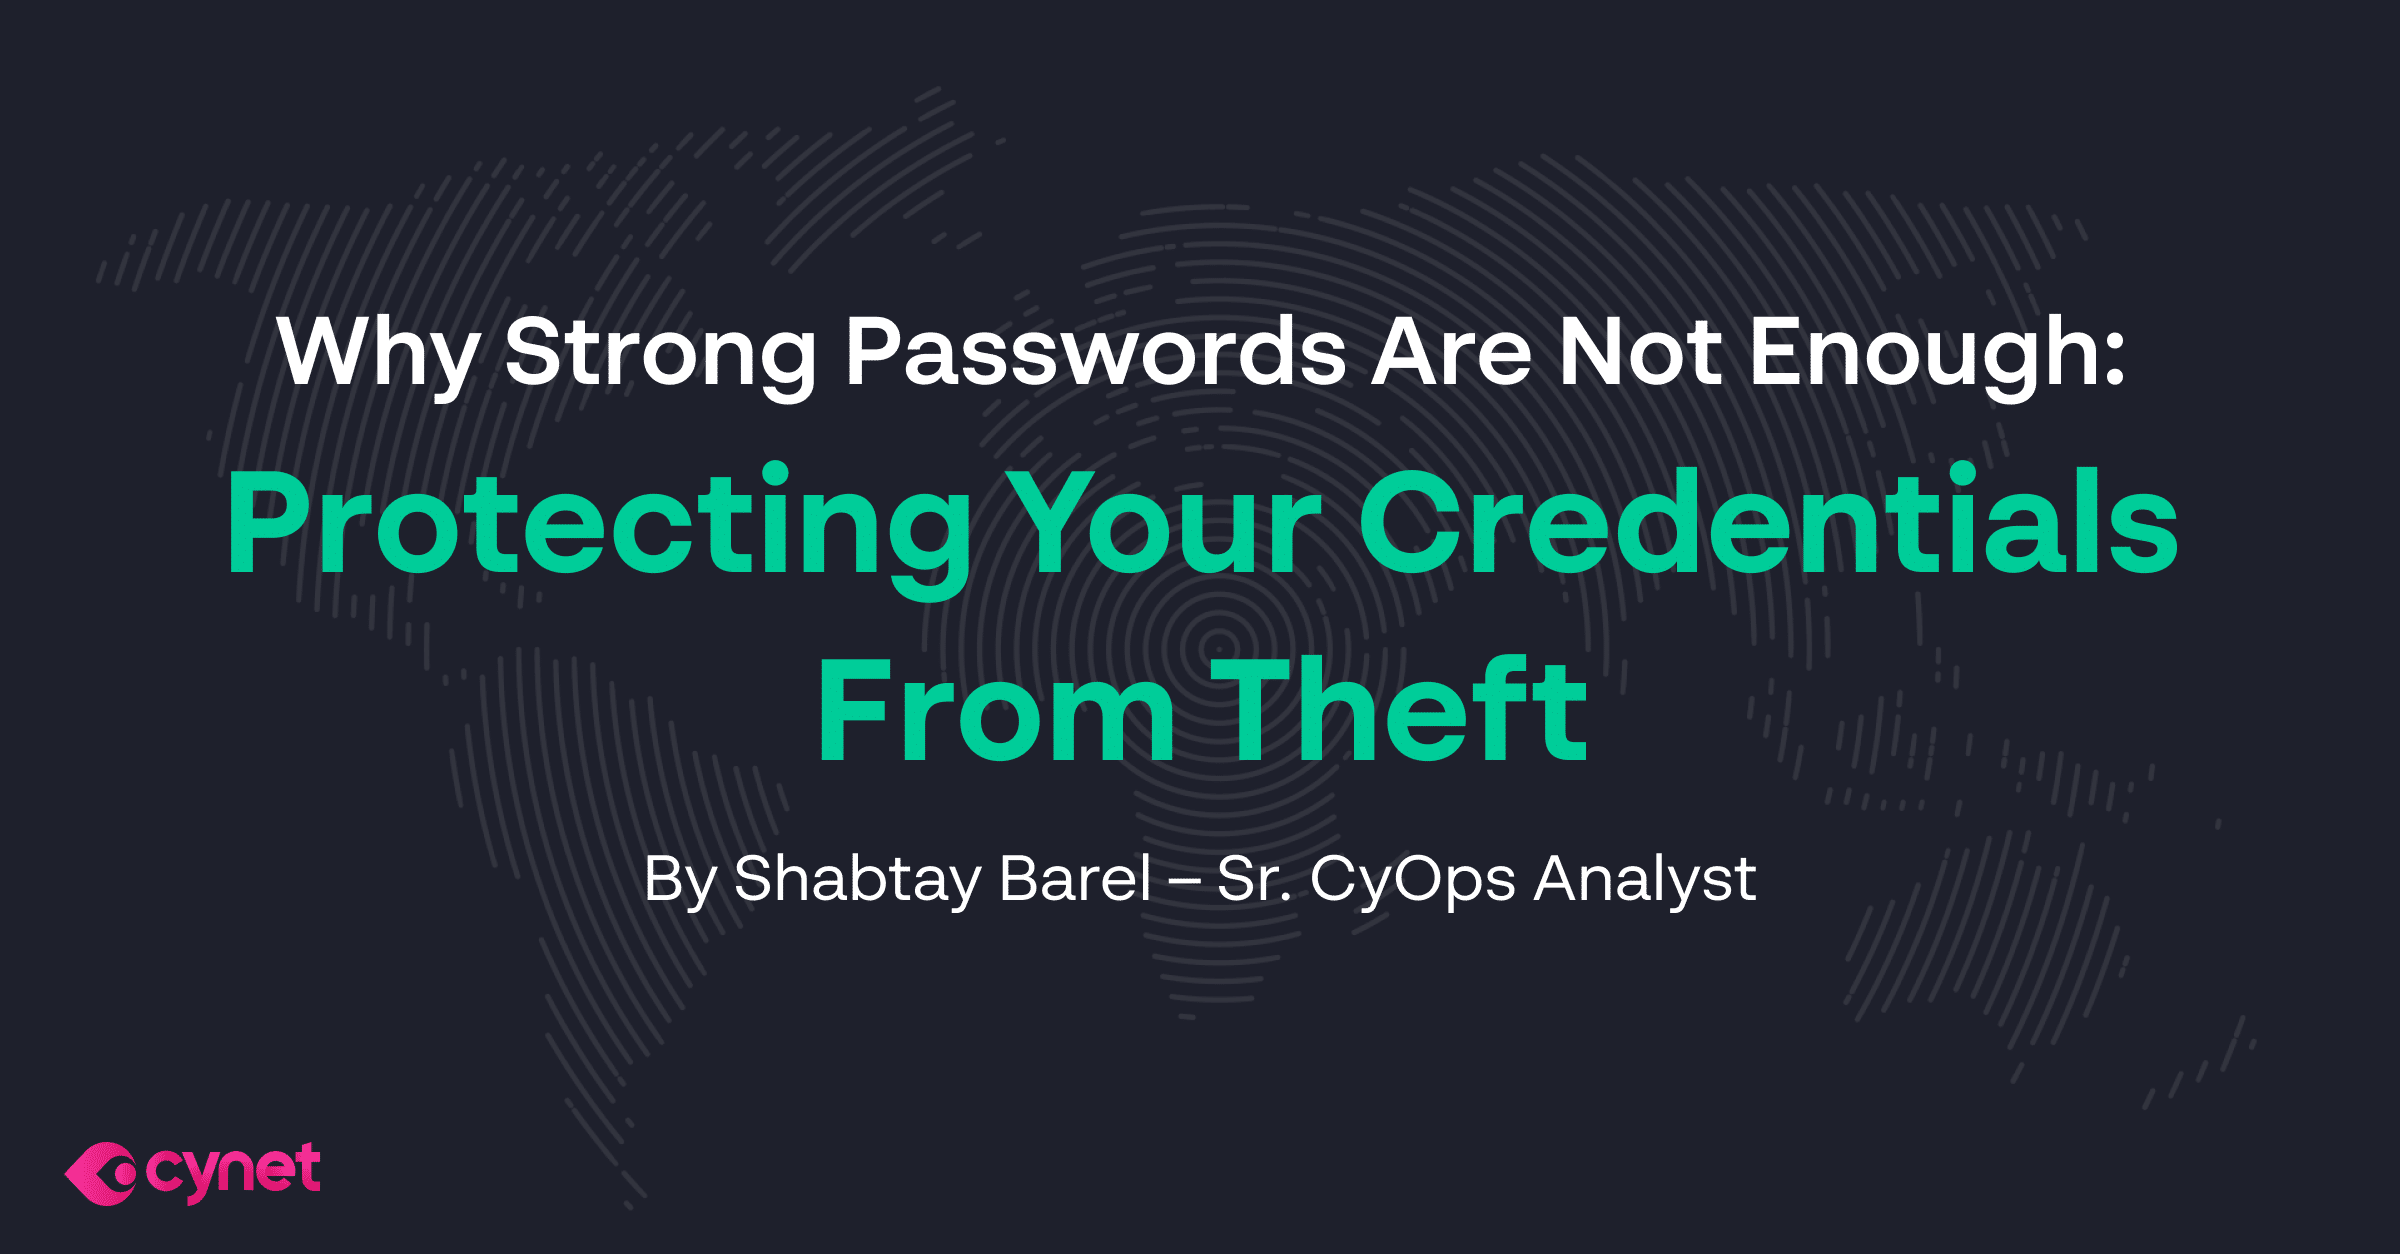 Why Strong Passwords are Not Enough: Protecting Your Credentials